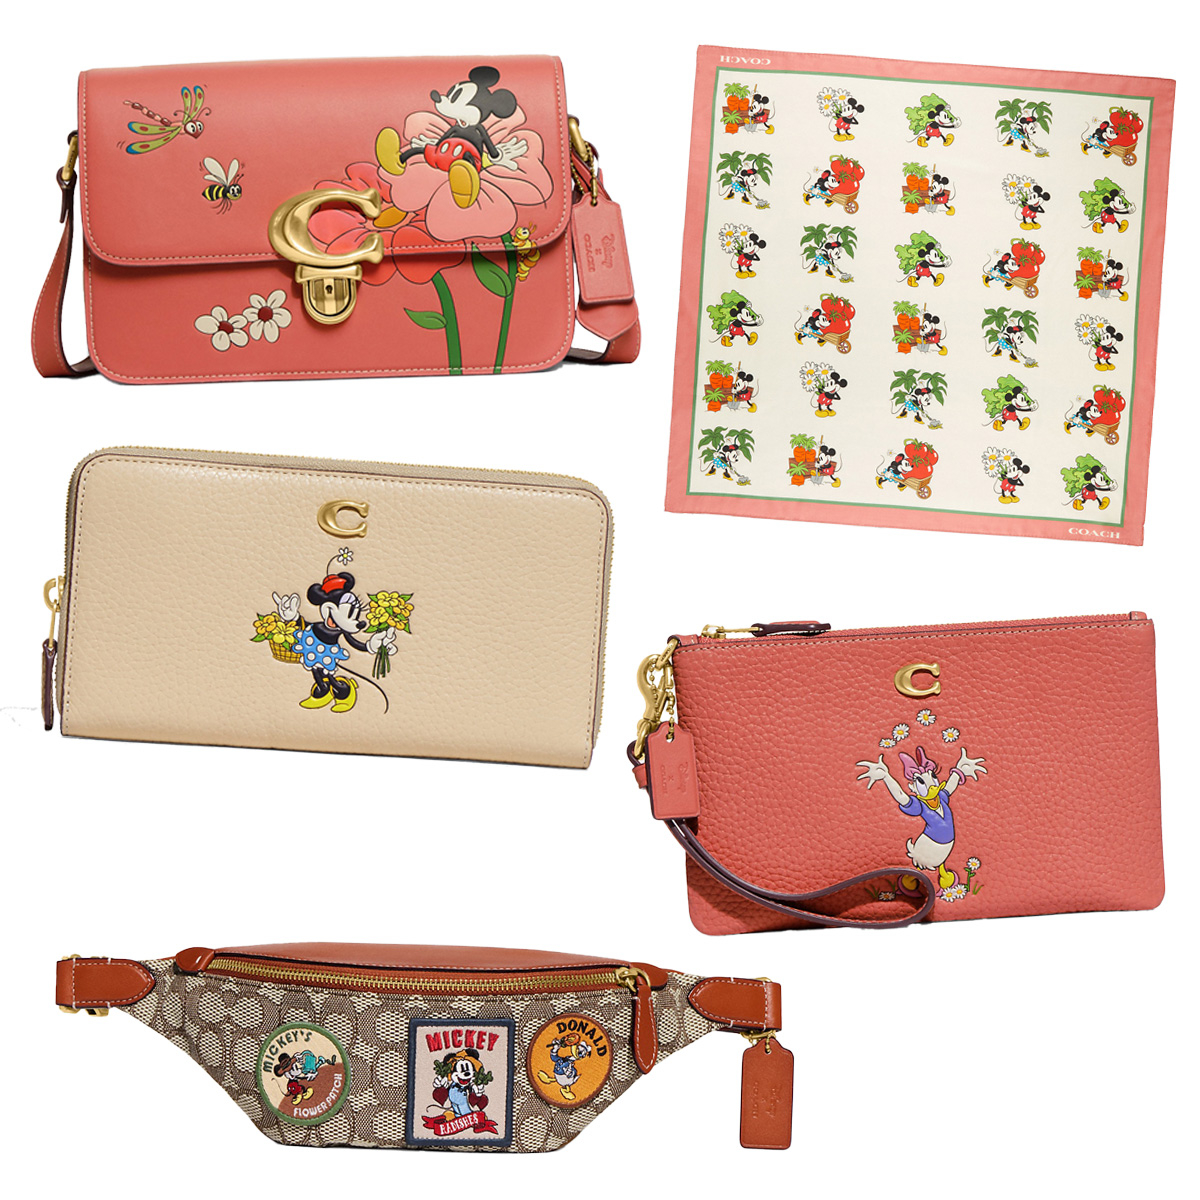 Oh Boy! The Disney X Coach 100 Years of Wonder Collection Is Here!